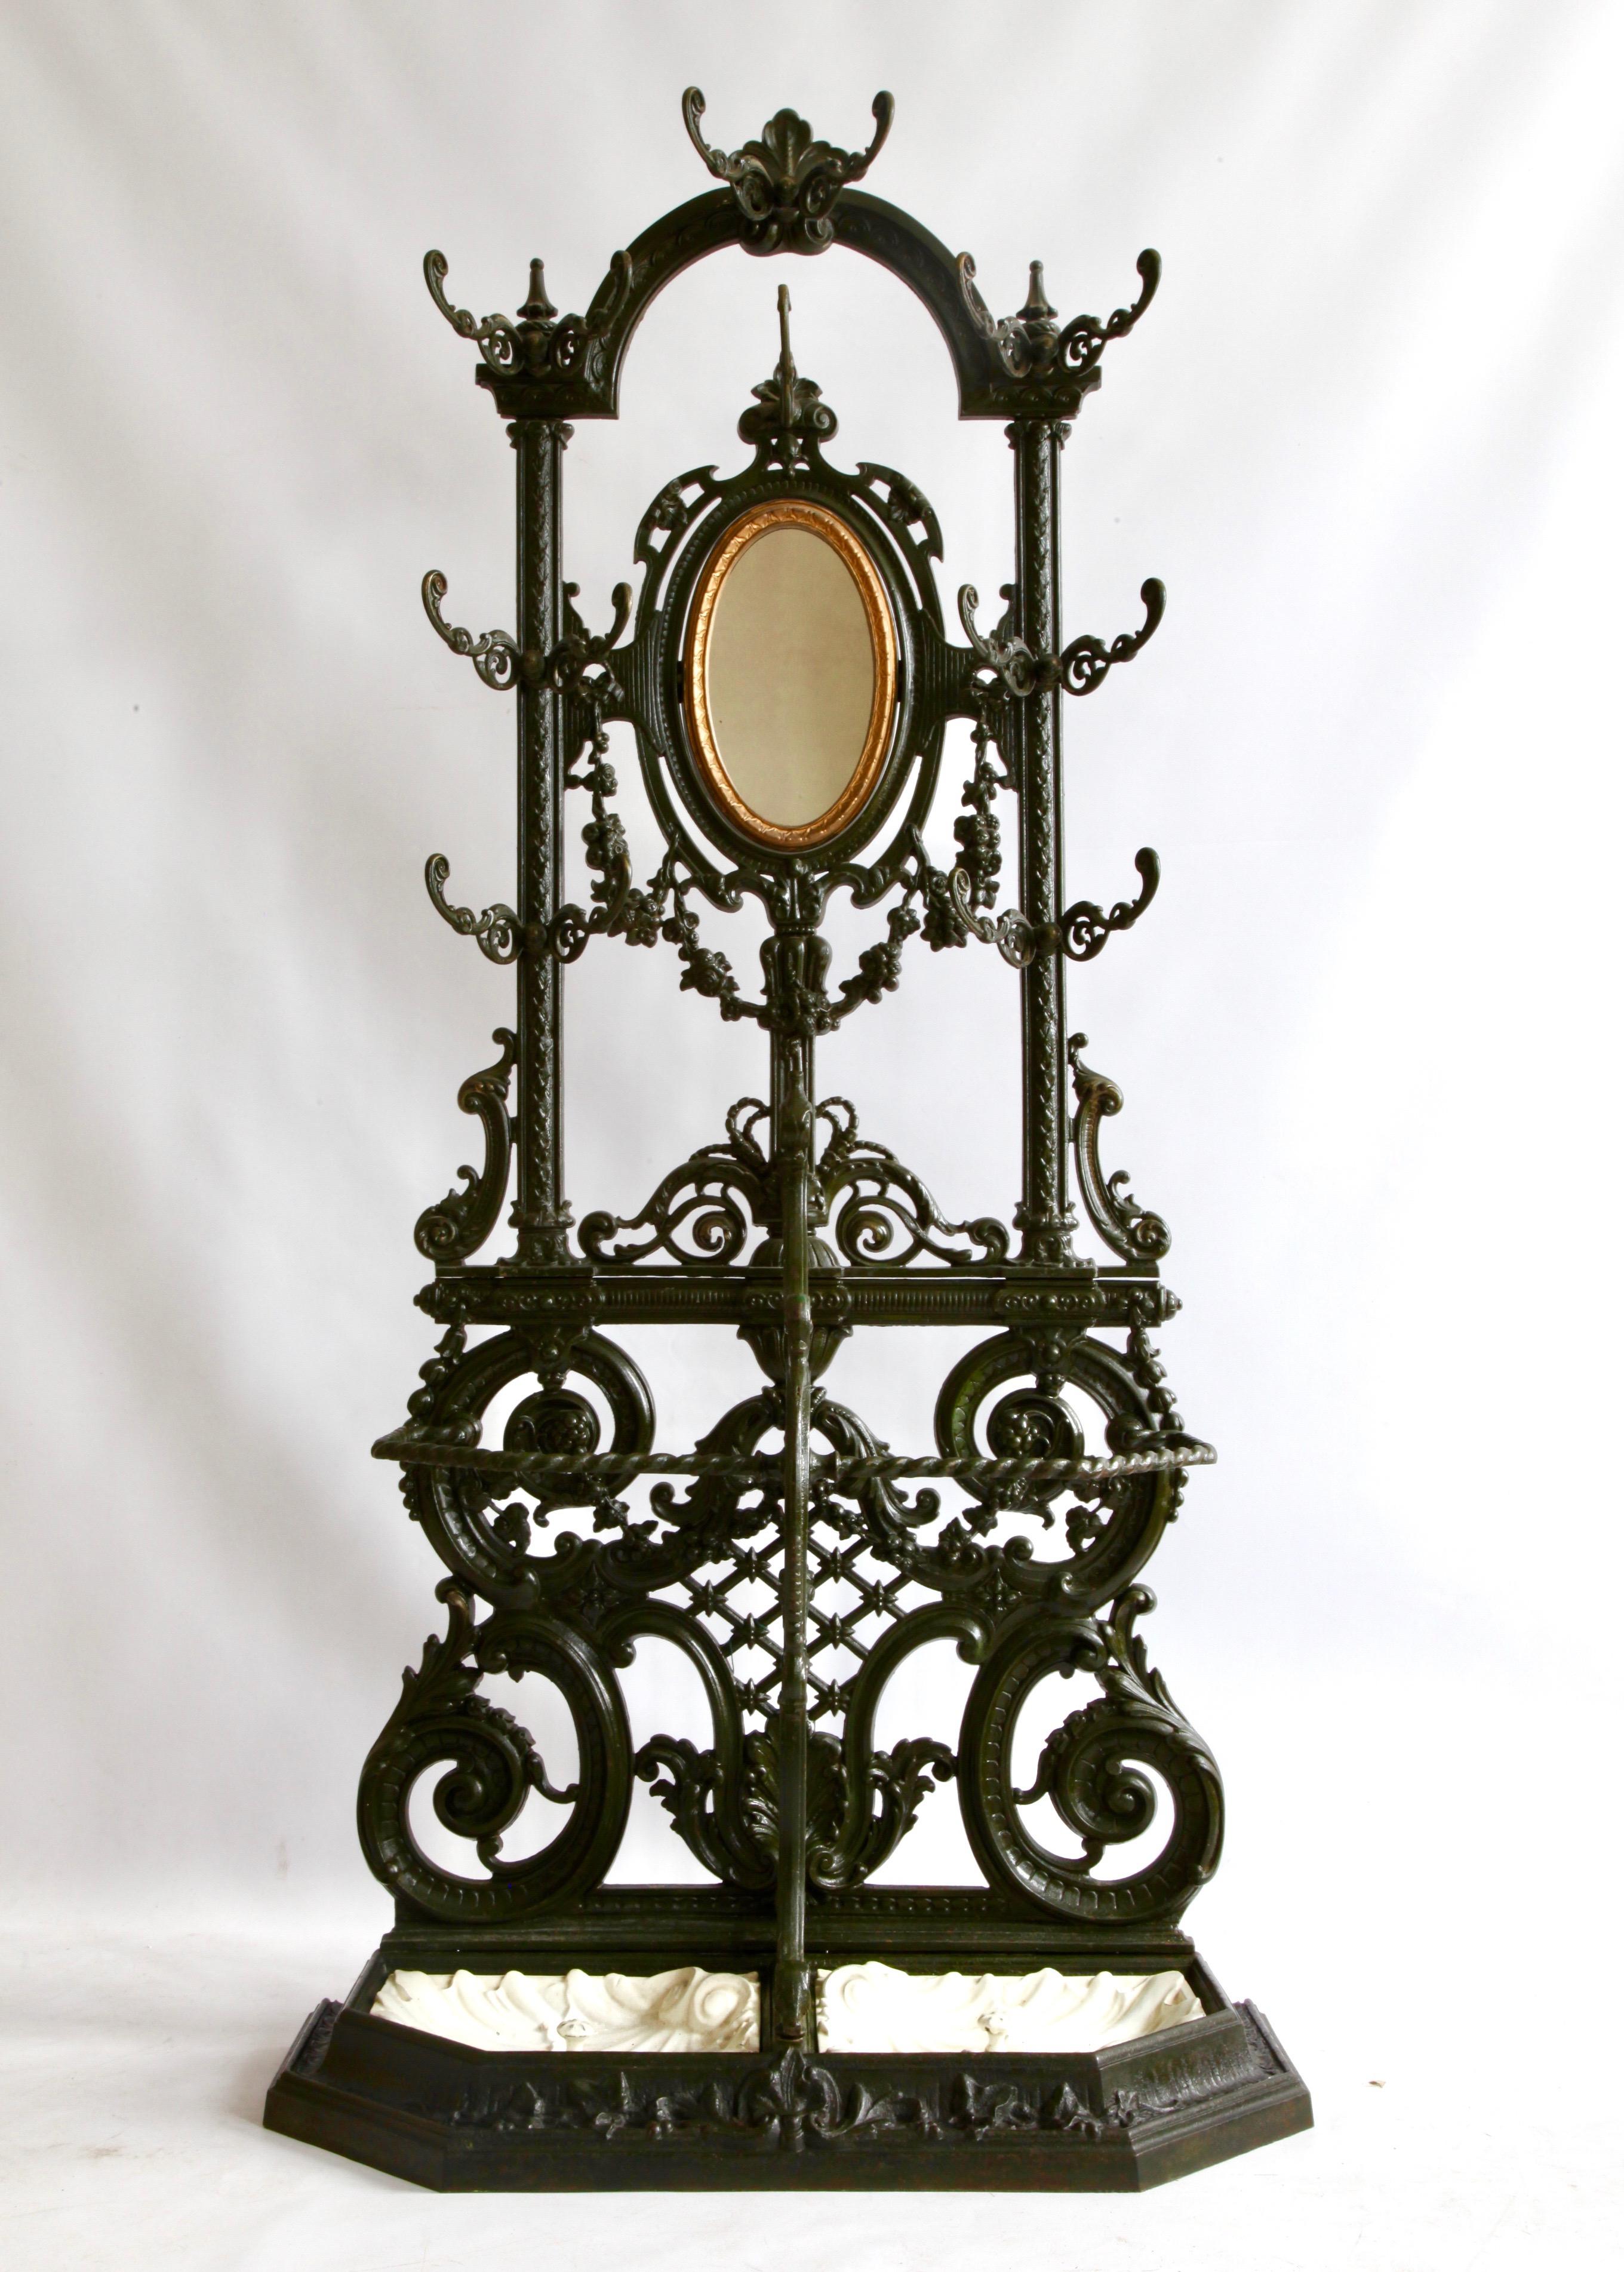 Napoleon III 19th Century Nap III Cast Iron Coat and Hat Stand by Frères Corneau For Sale